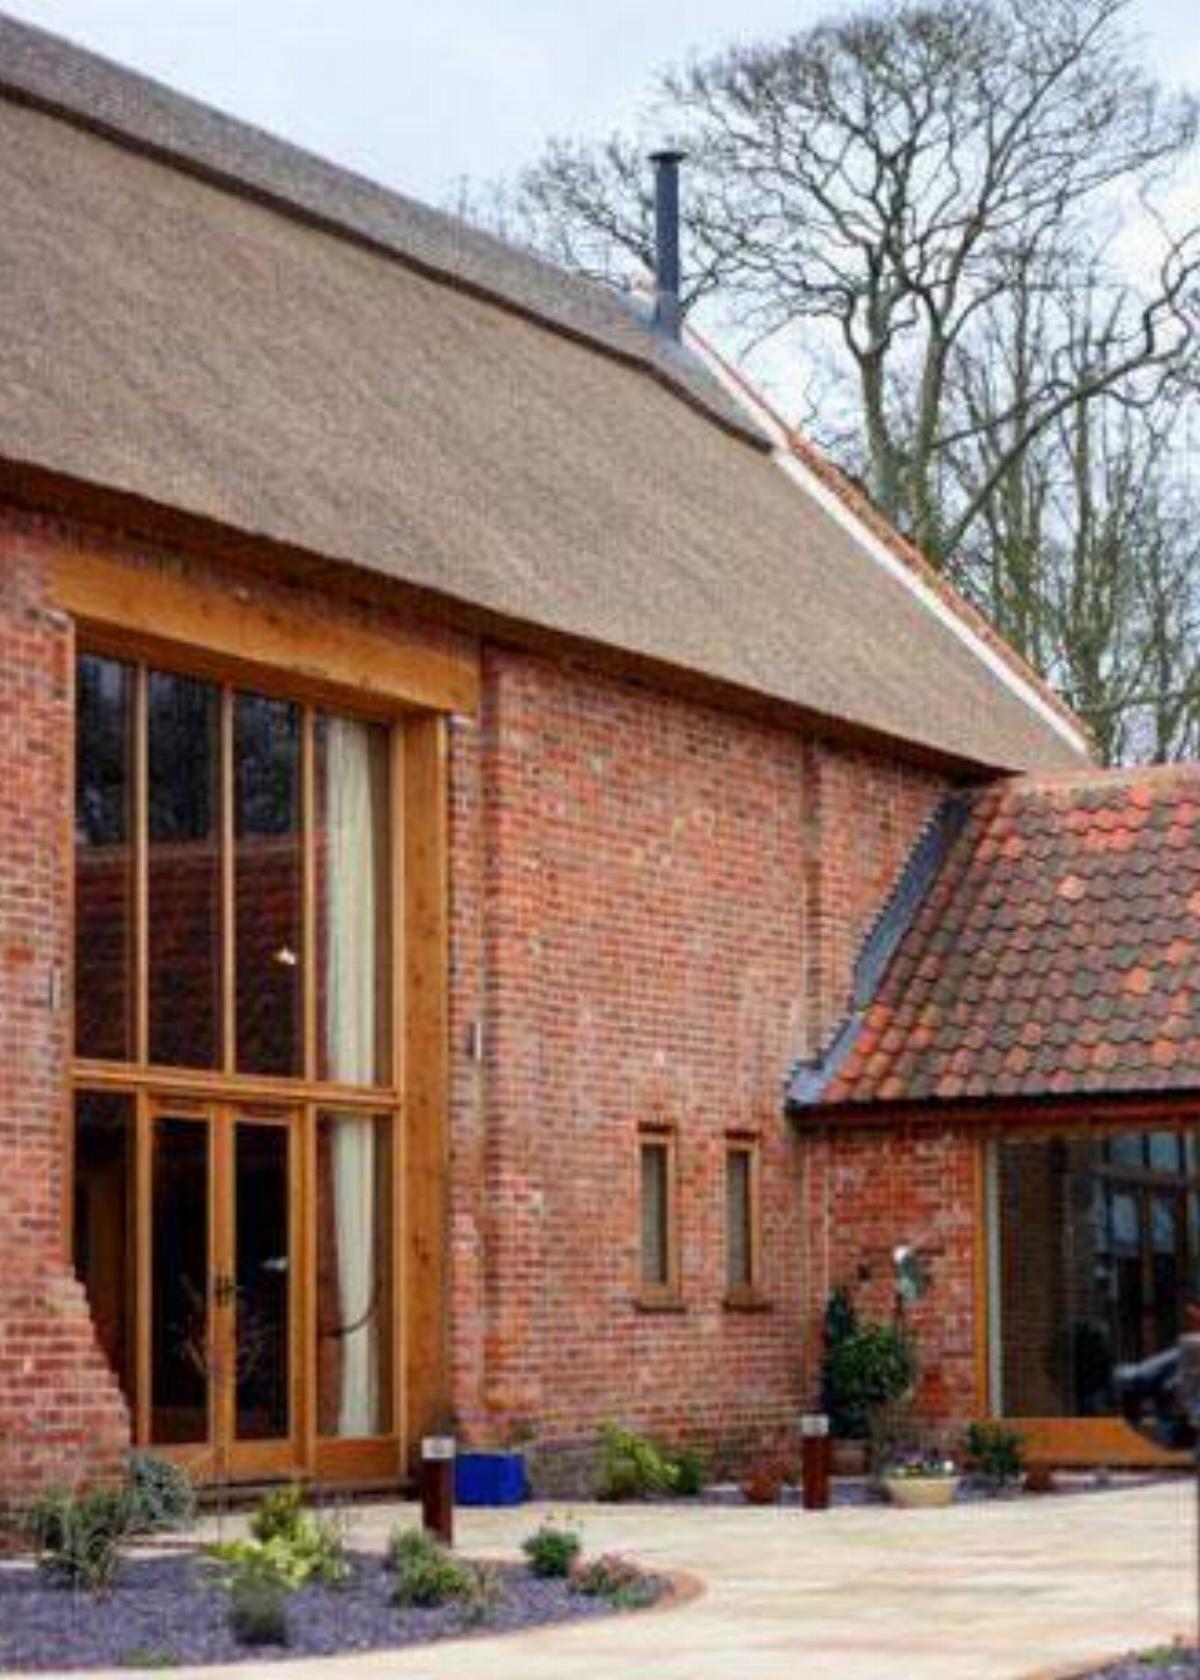 Braid Barn Boutique Bed and Breakfast Hotel Stokesby United Kingdom